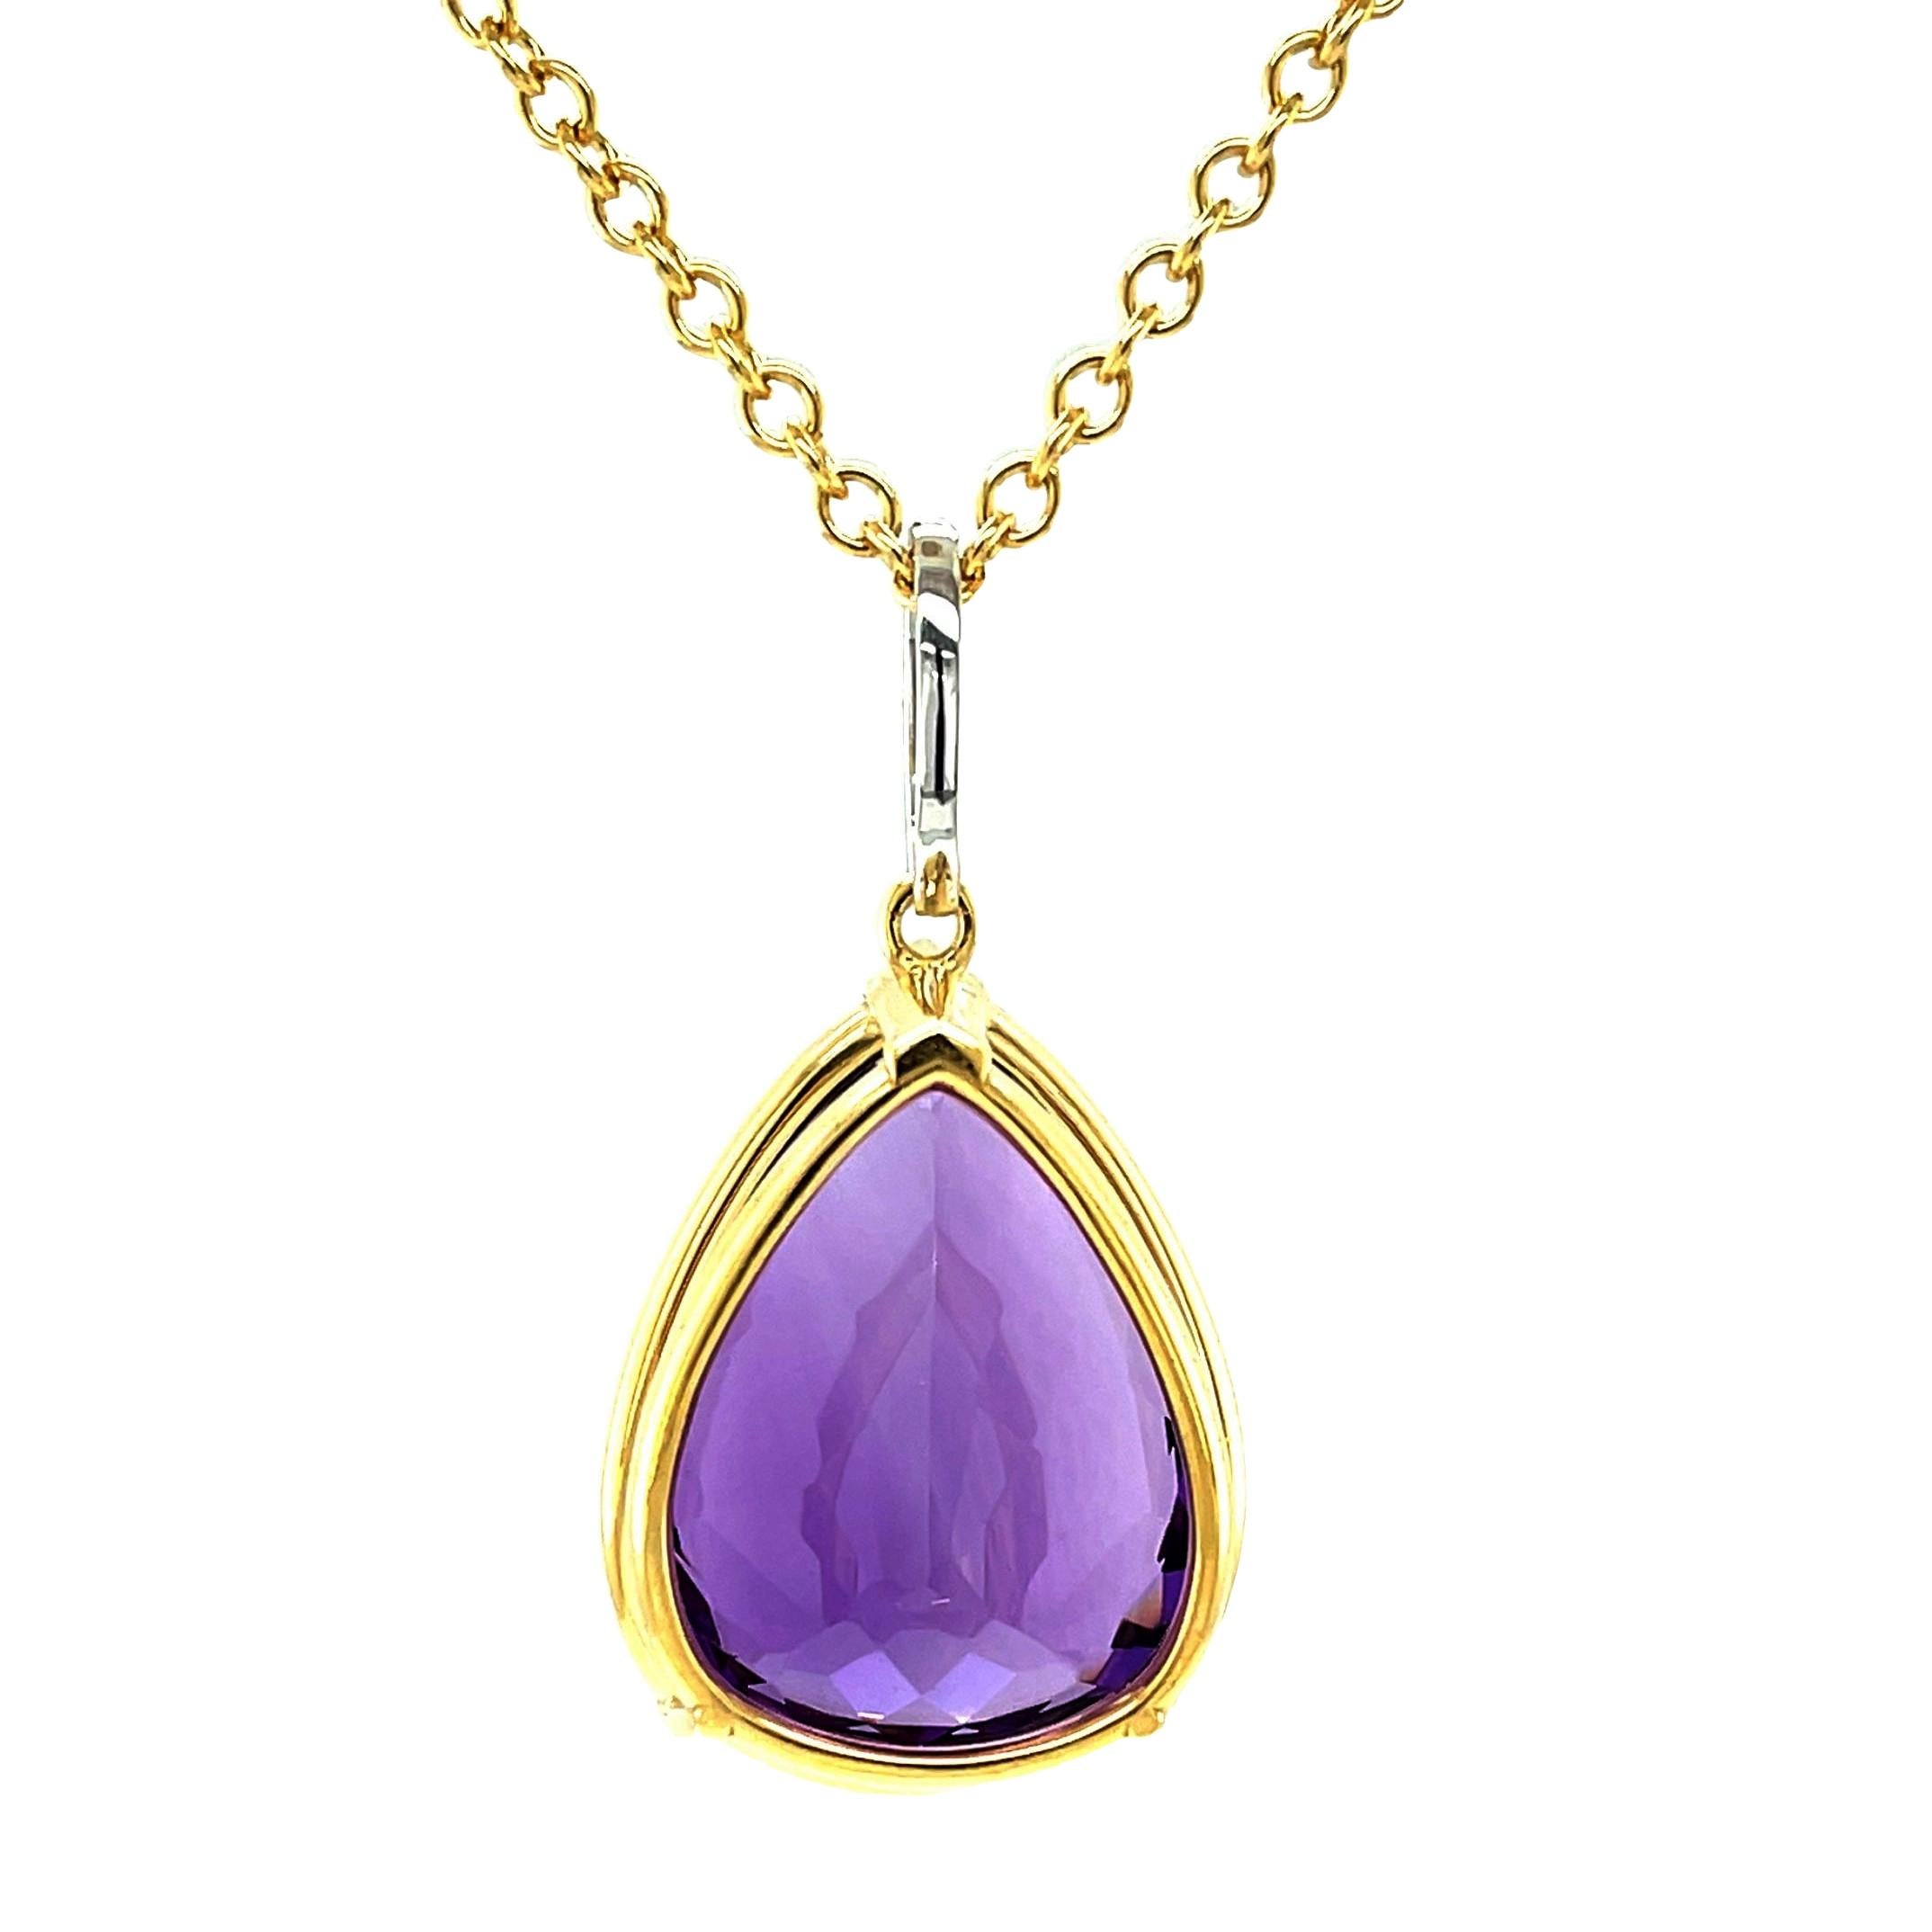 40 Carat Pear Shape Amethyst and Diamond Pendant in 18k Yellow Gold with Chain In New Condition For Sale In Los Angeles, CA